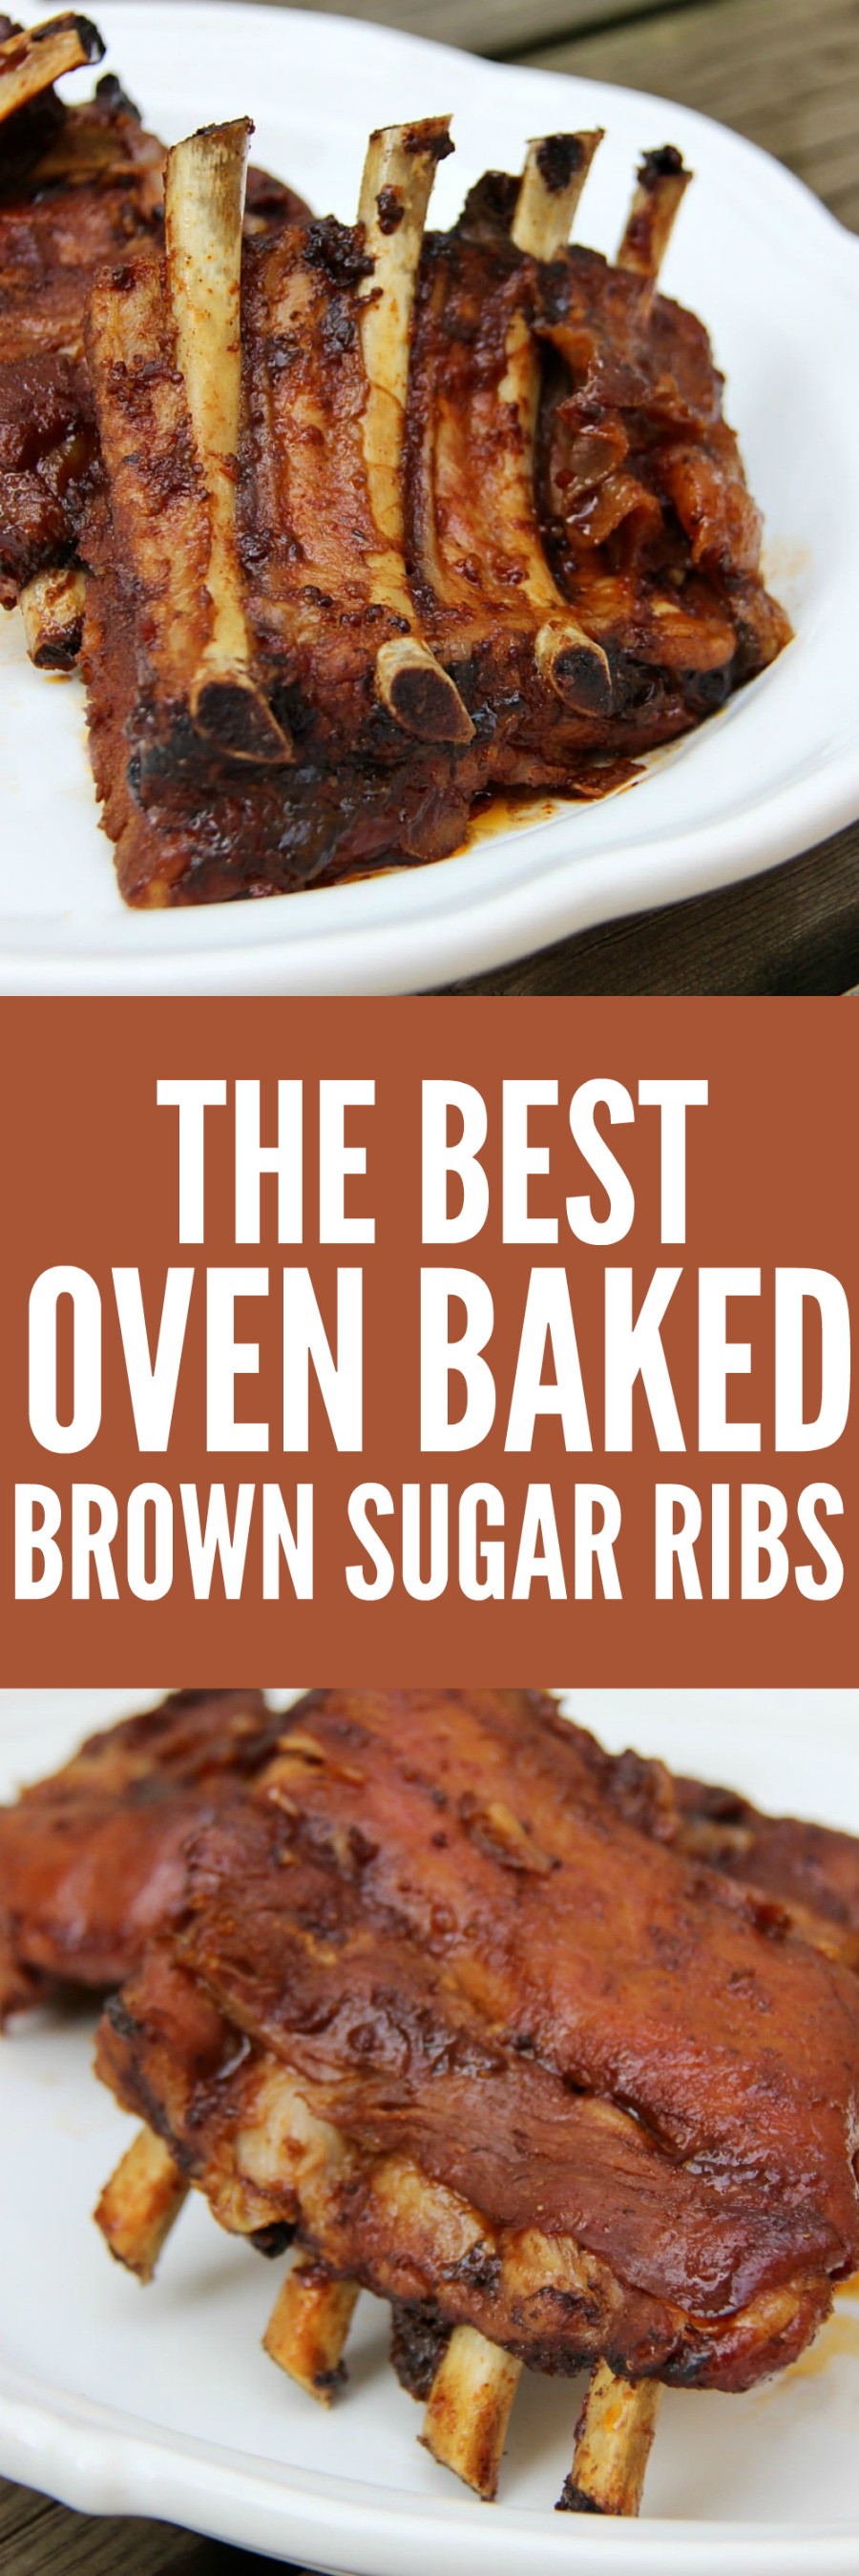 The Best Oven Baked Brown Sugar Ribs Recipe